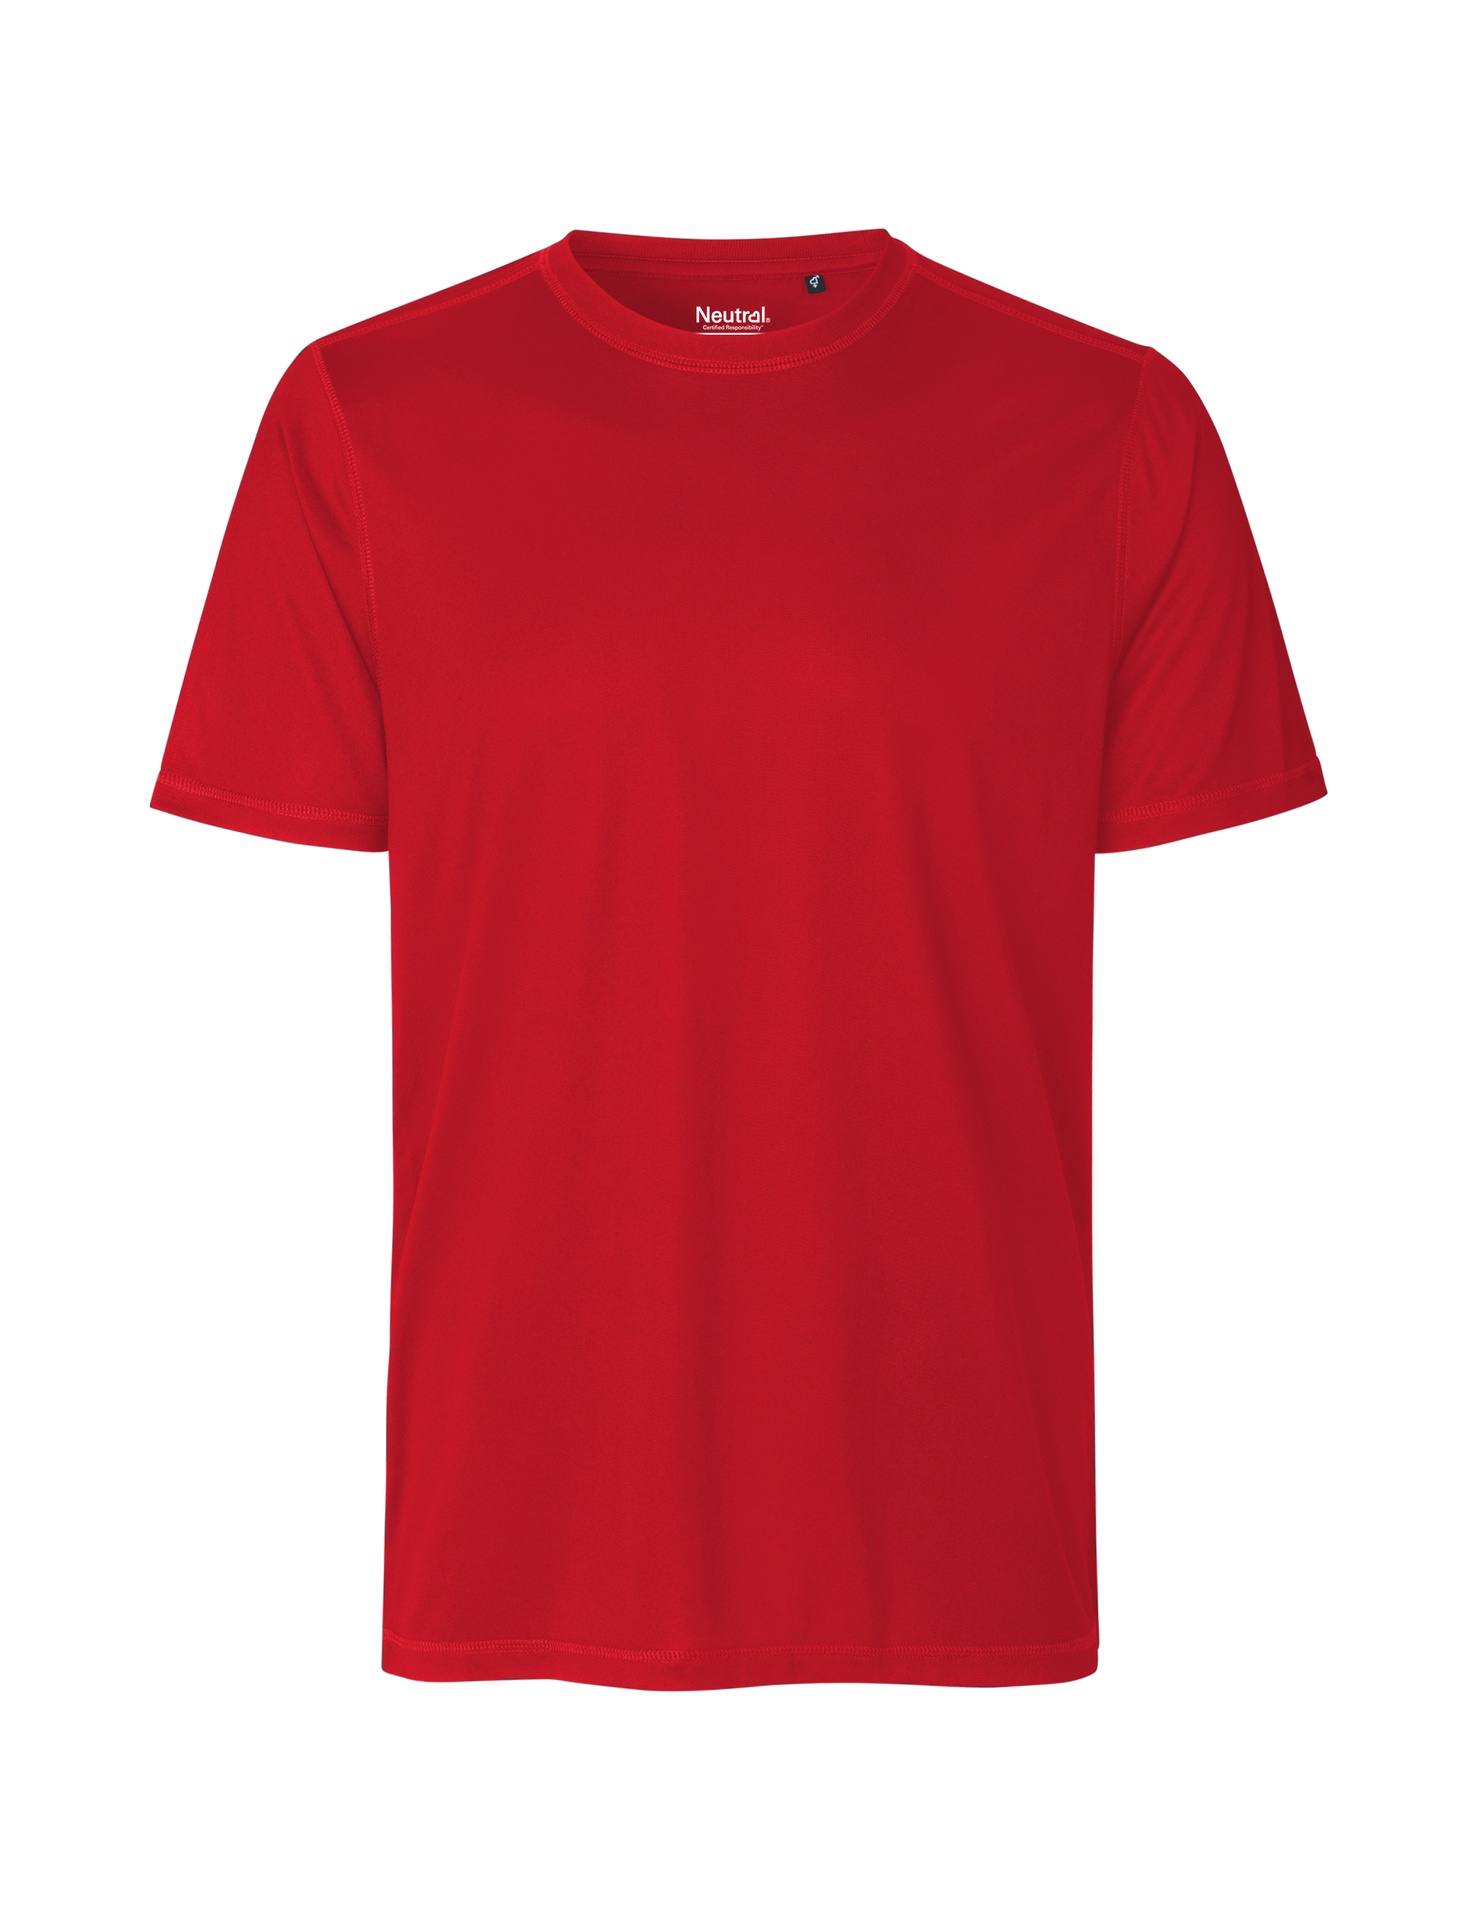 [PR/03766] Recycled Performance T-Shirt (Red 05, S)